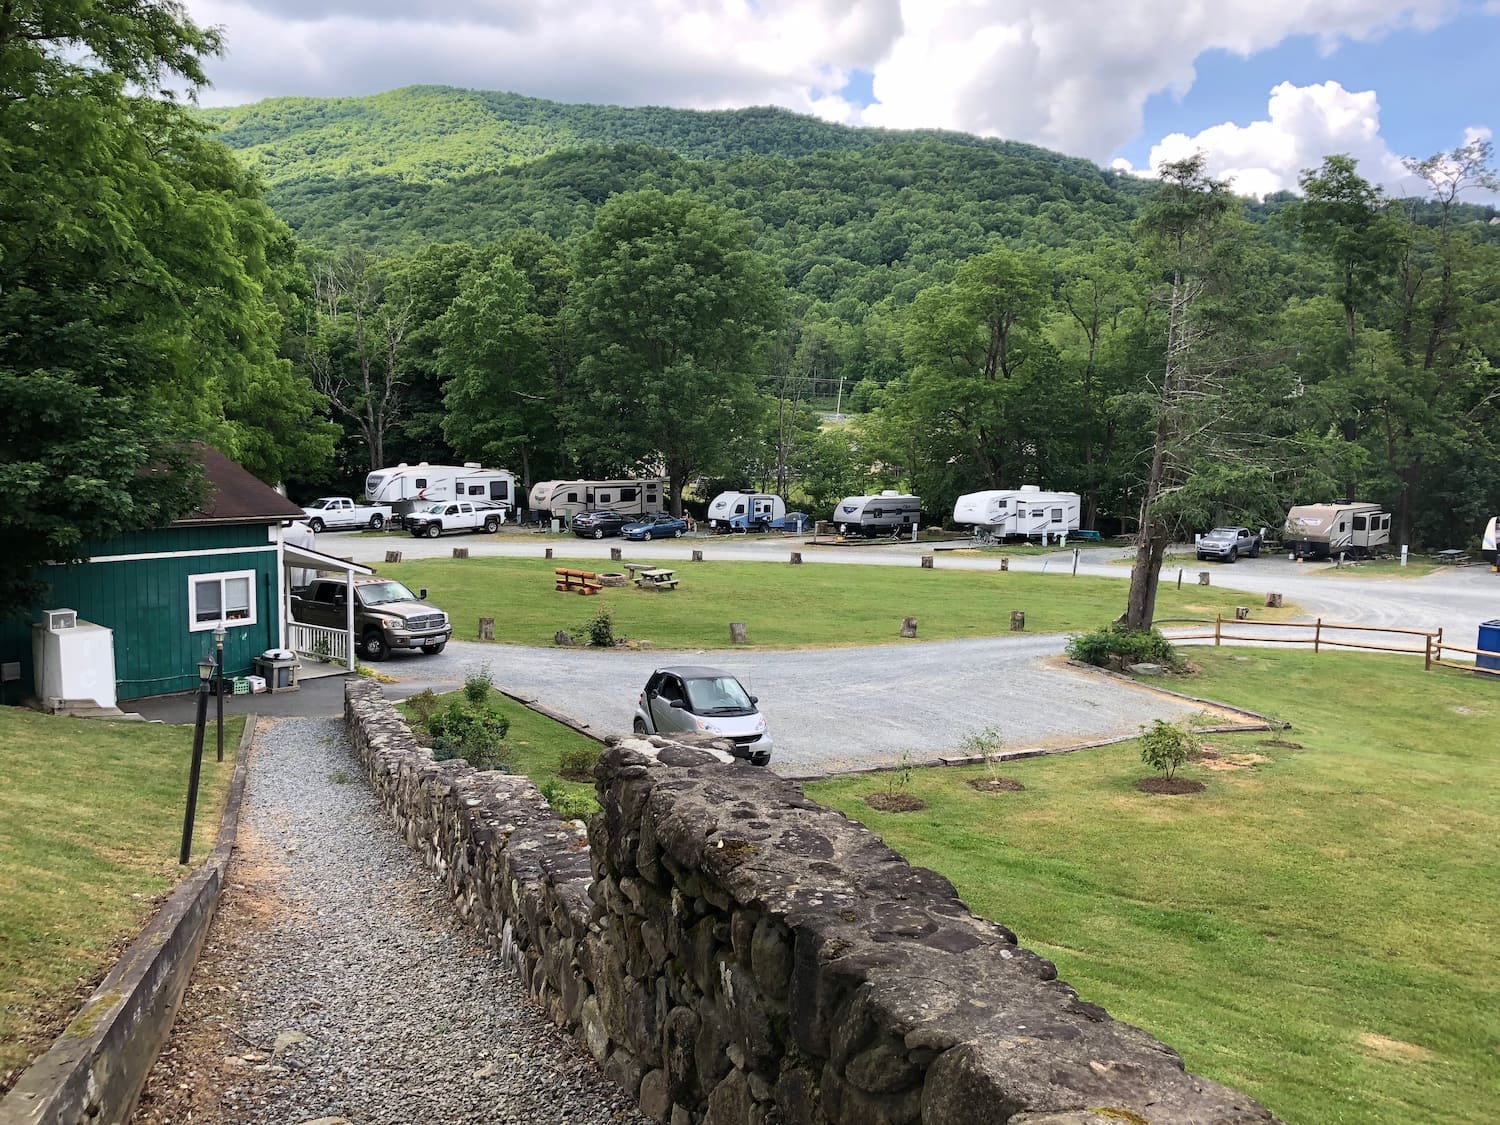 RVs lined up at campground